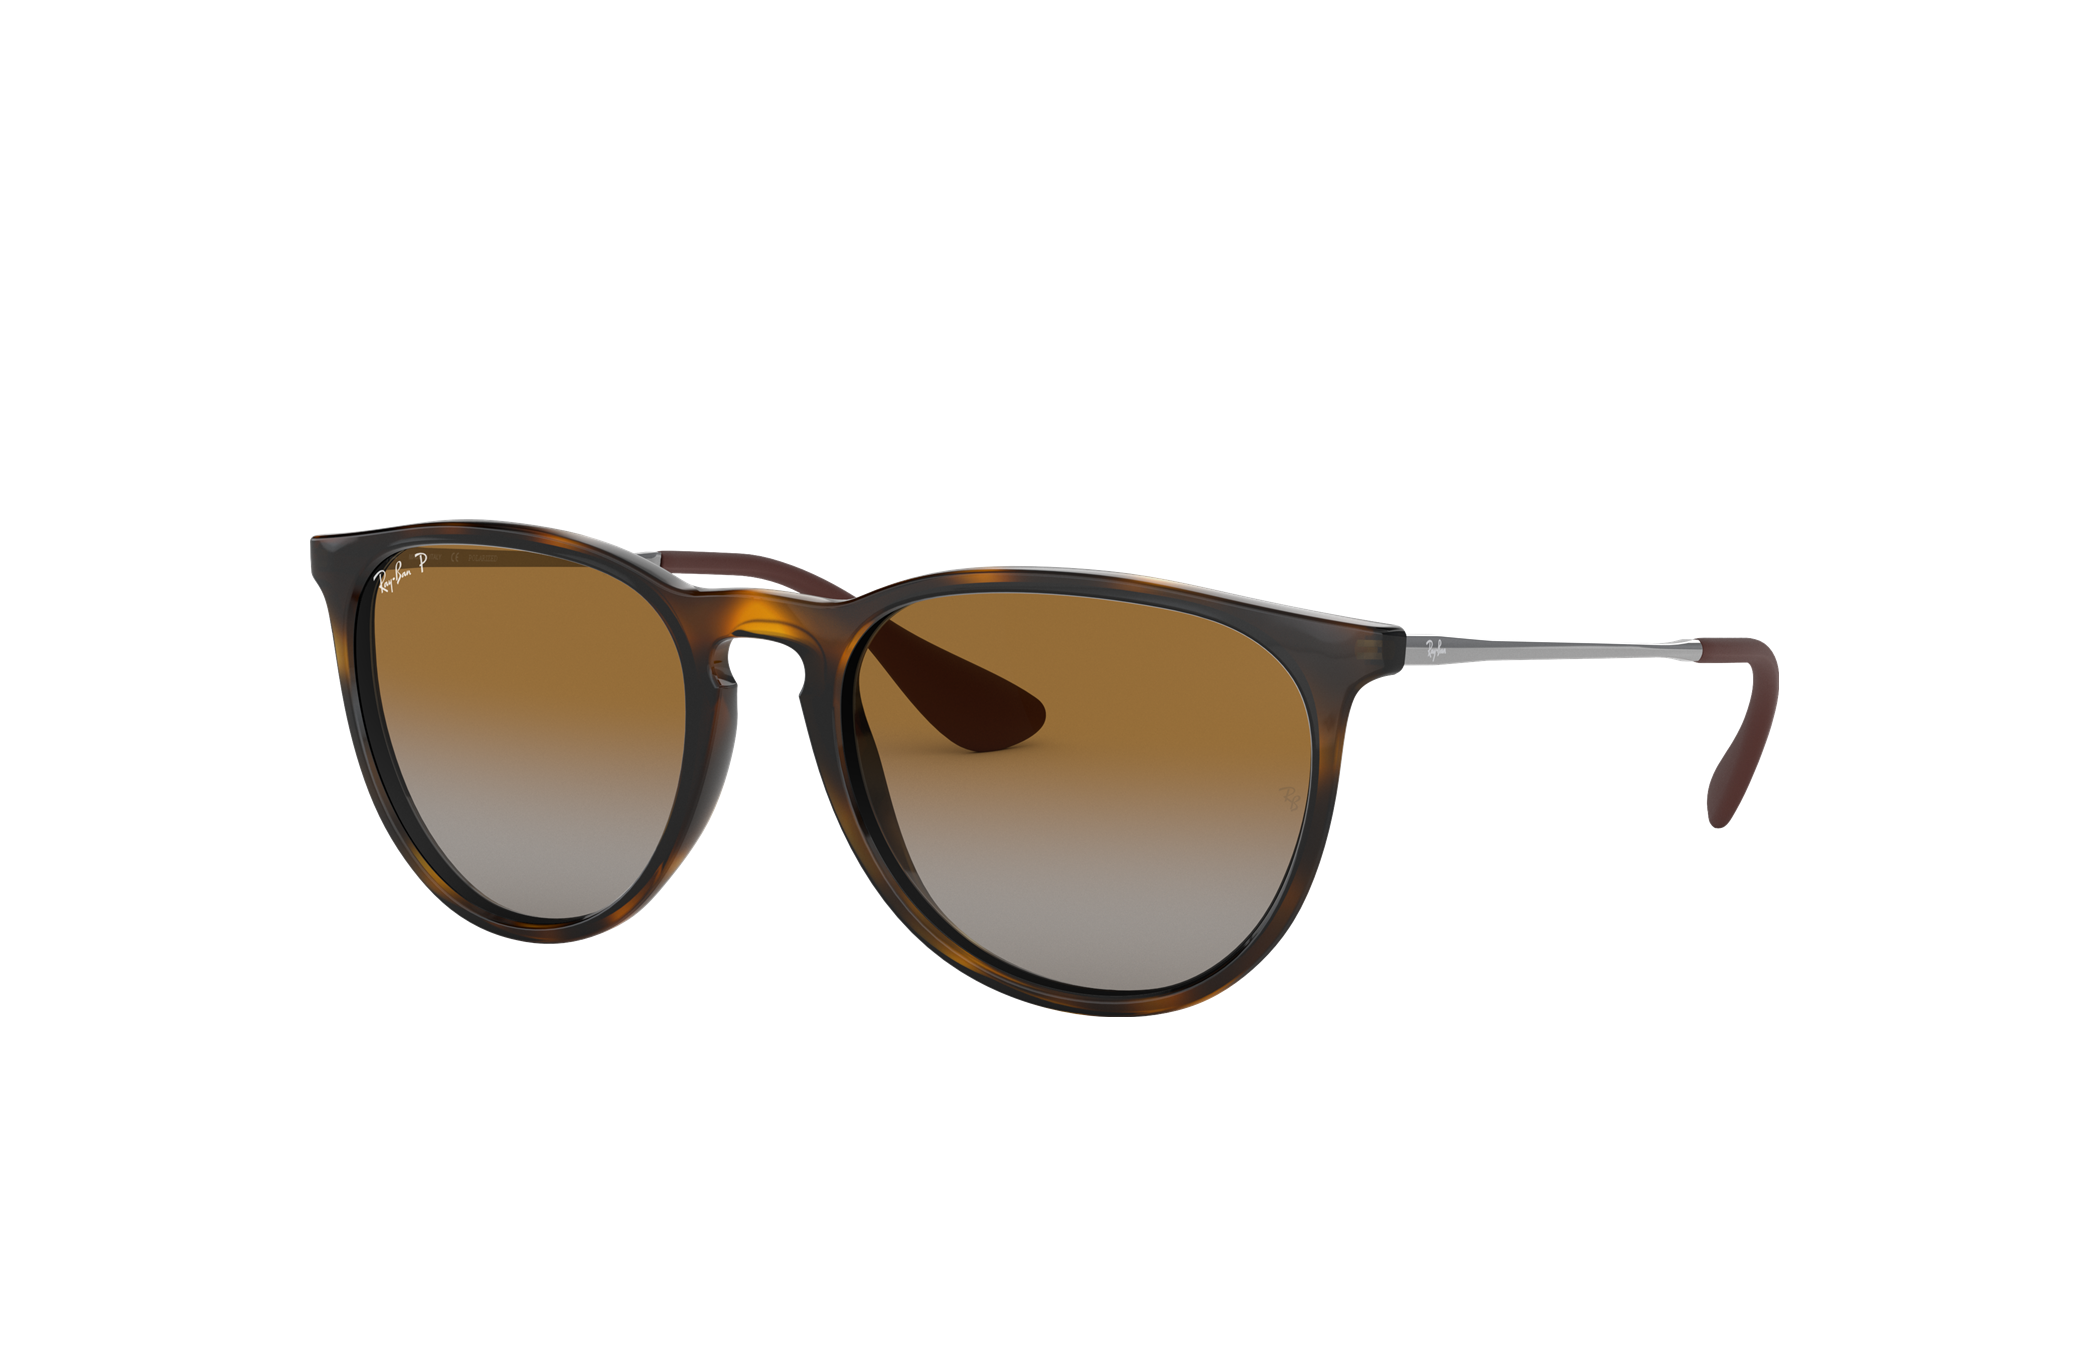 Erika Classic Sunglasses in Light Havana and Brown - RB4171F | Ray-Ban® US